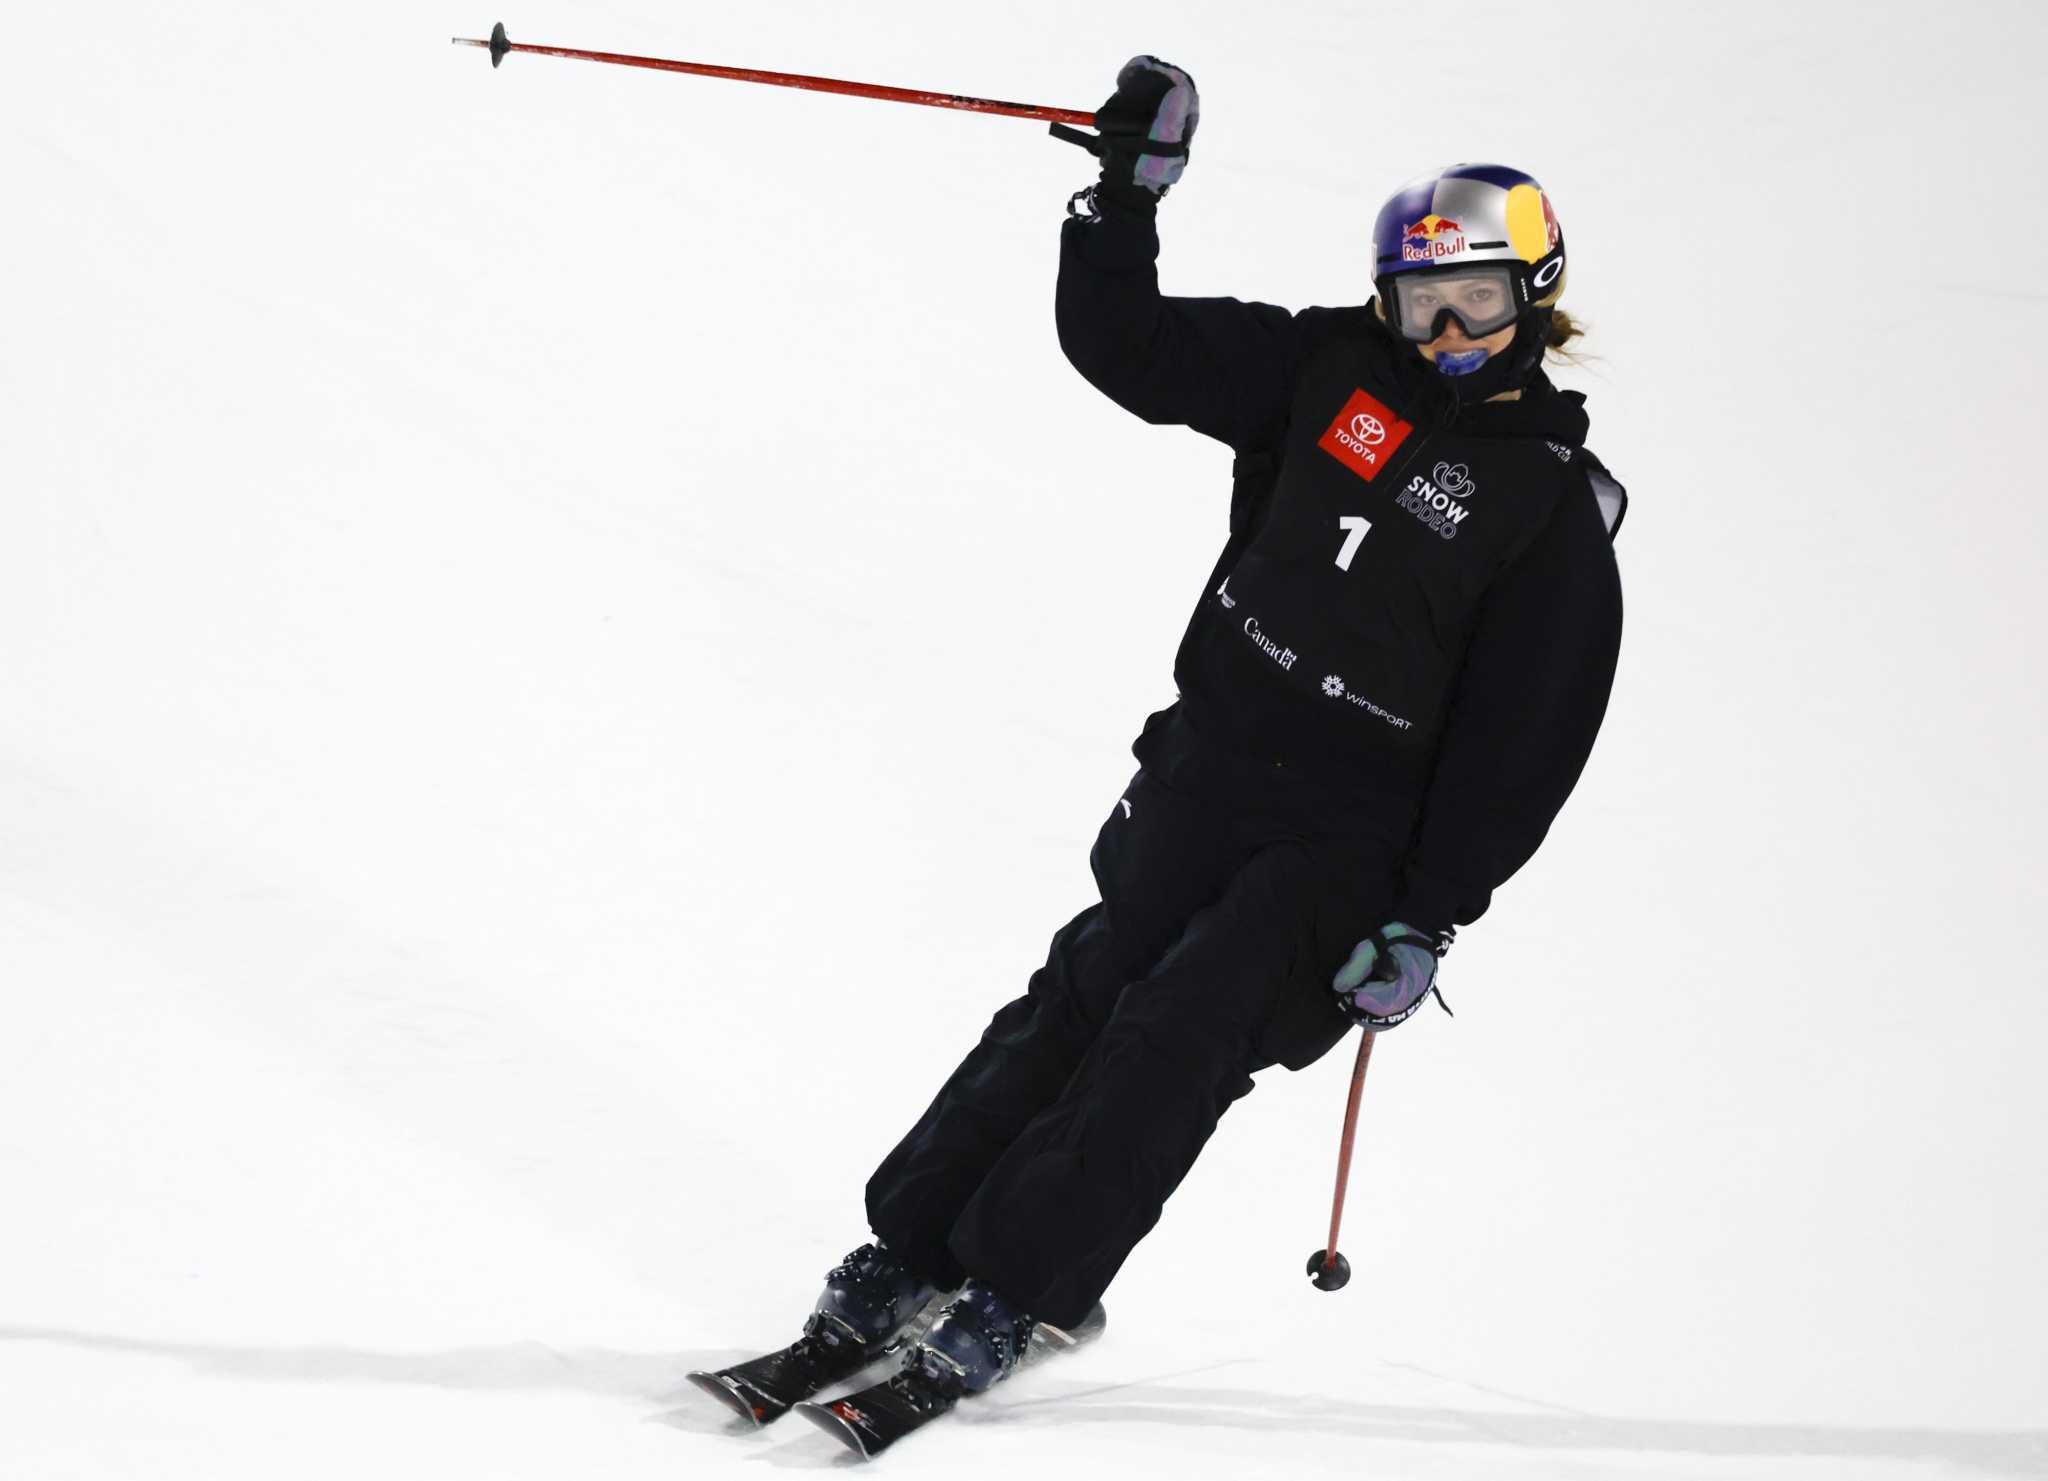 Skier Eileen Gu Navigates the Road to the Beijing Olympics